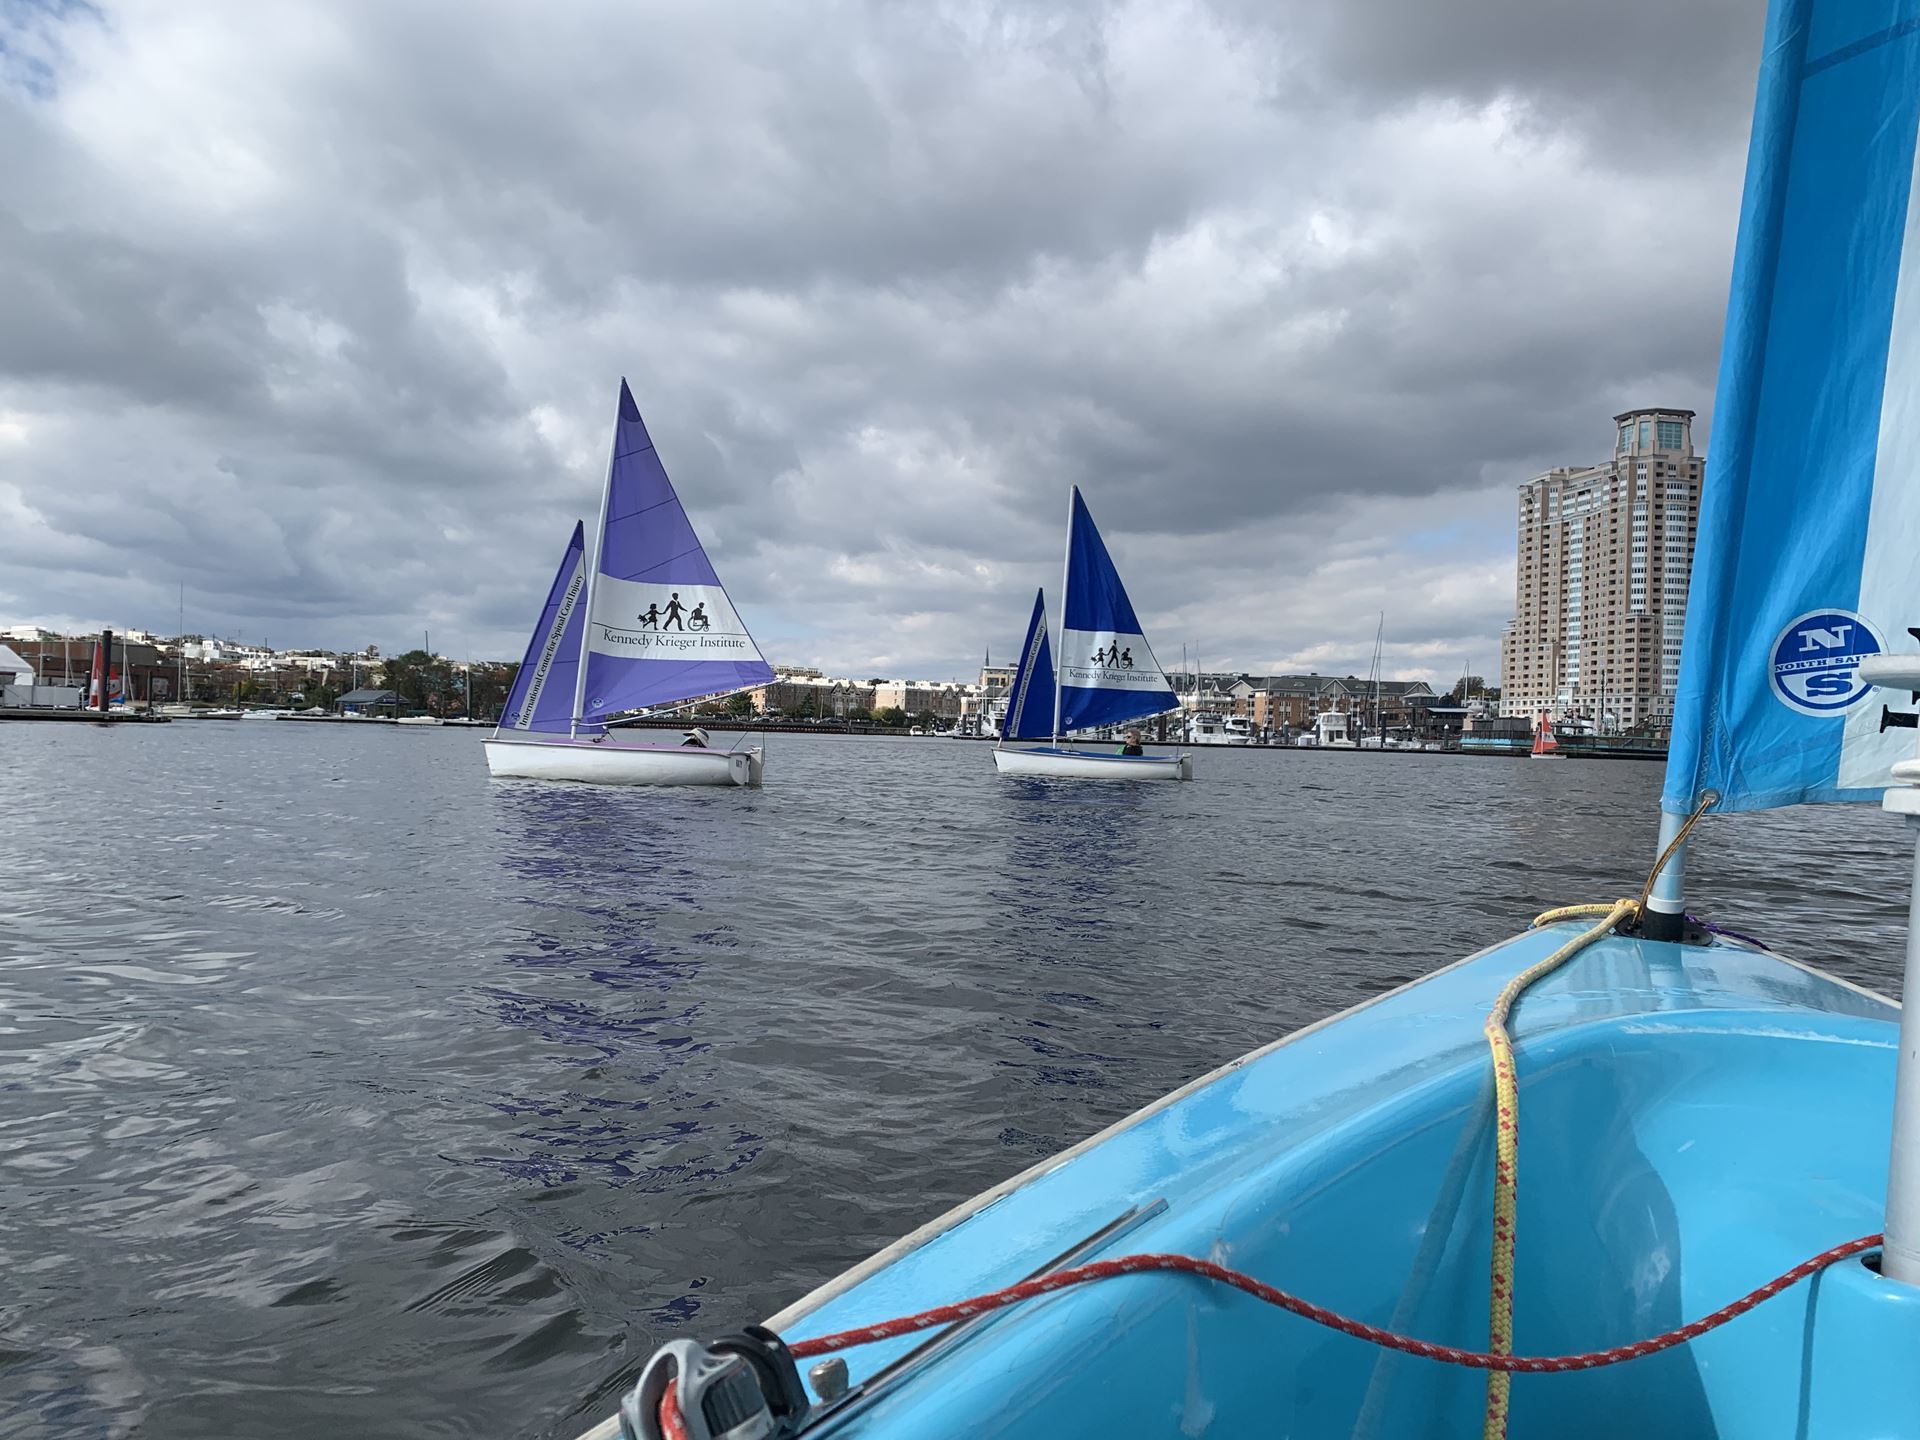 Hansa Access Dinghies in Action - a first person perspective